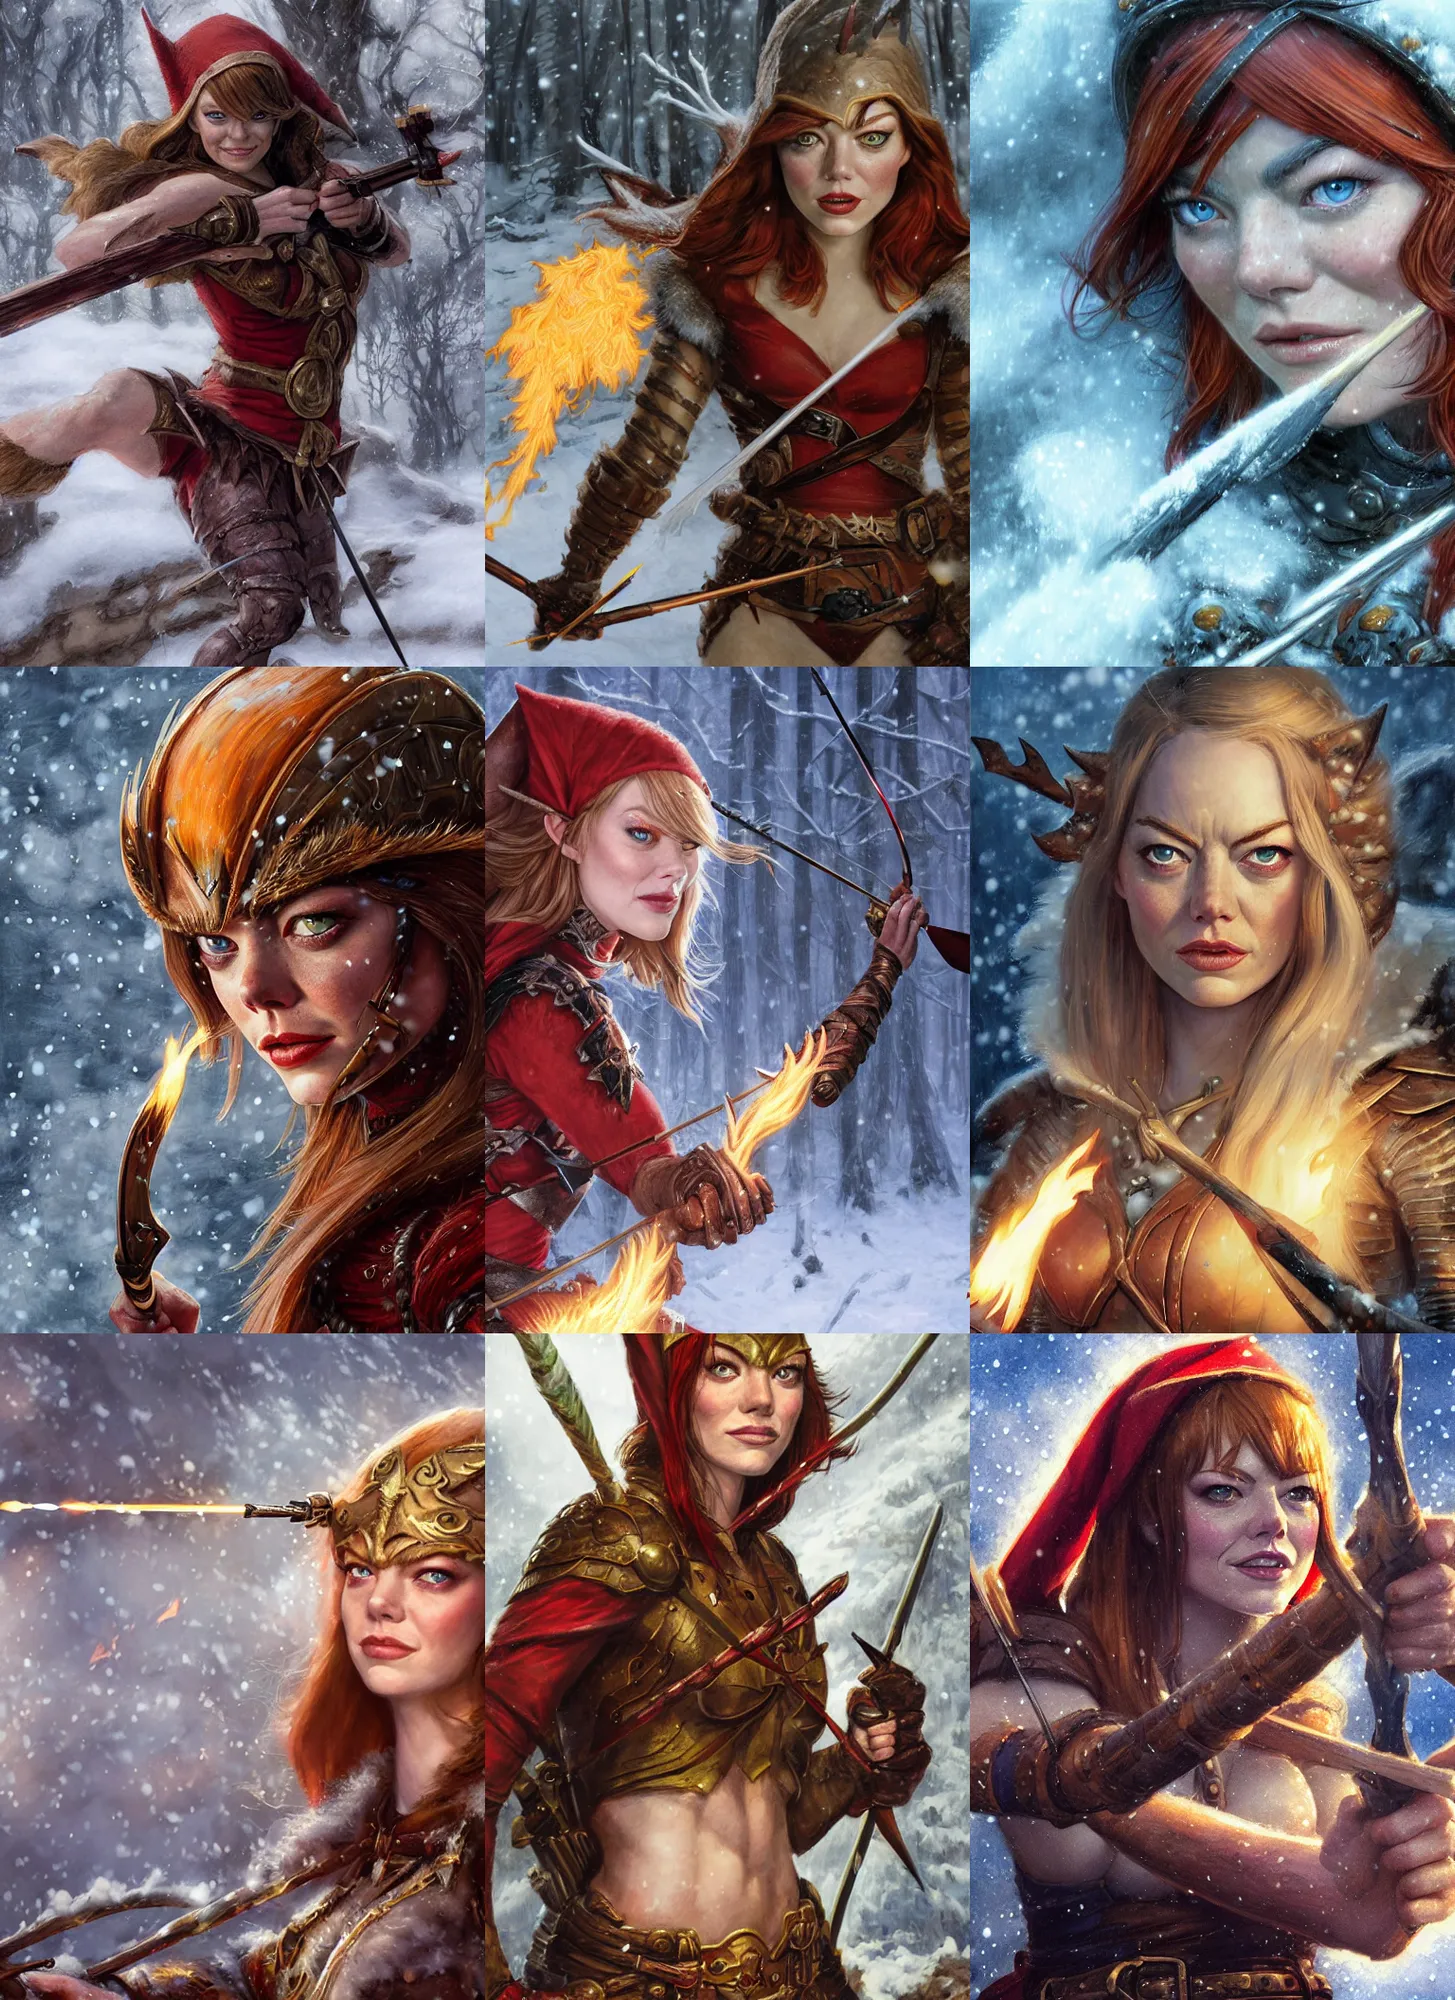 Prompt: close-up face portrait of Emma Stone as a muscled warrior elf shooting a flaming arrow with her huntsmen bow, snowy winter scene, Donato Giancola, Mark Brooks, Ralph Horsley, Charlie Bowater, Artgerm, Christopher Balaskas, Bastien Lecouffe-Deharme, Boris Vallejo